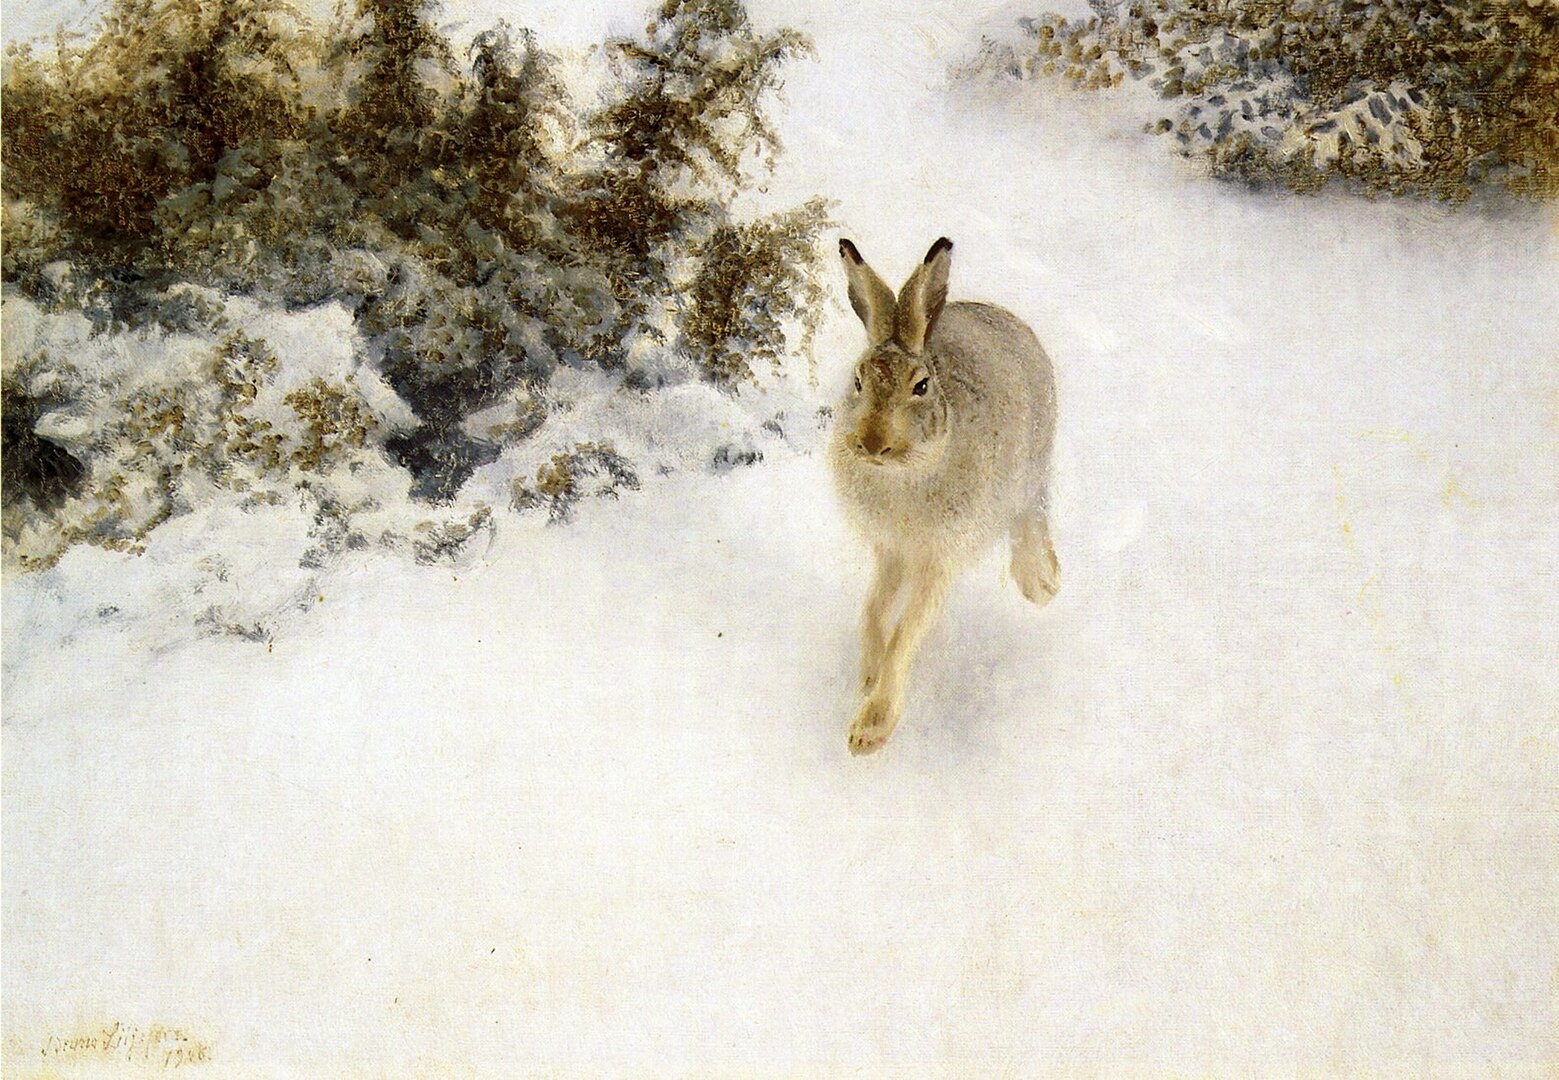 A winter hare in a snowy forest